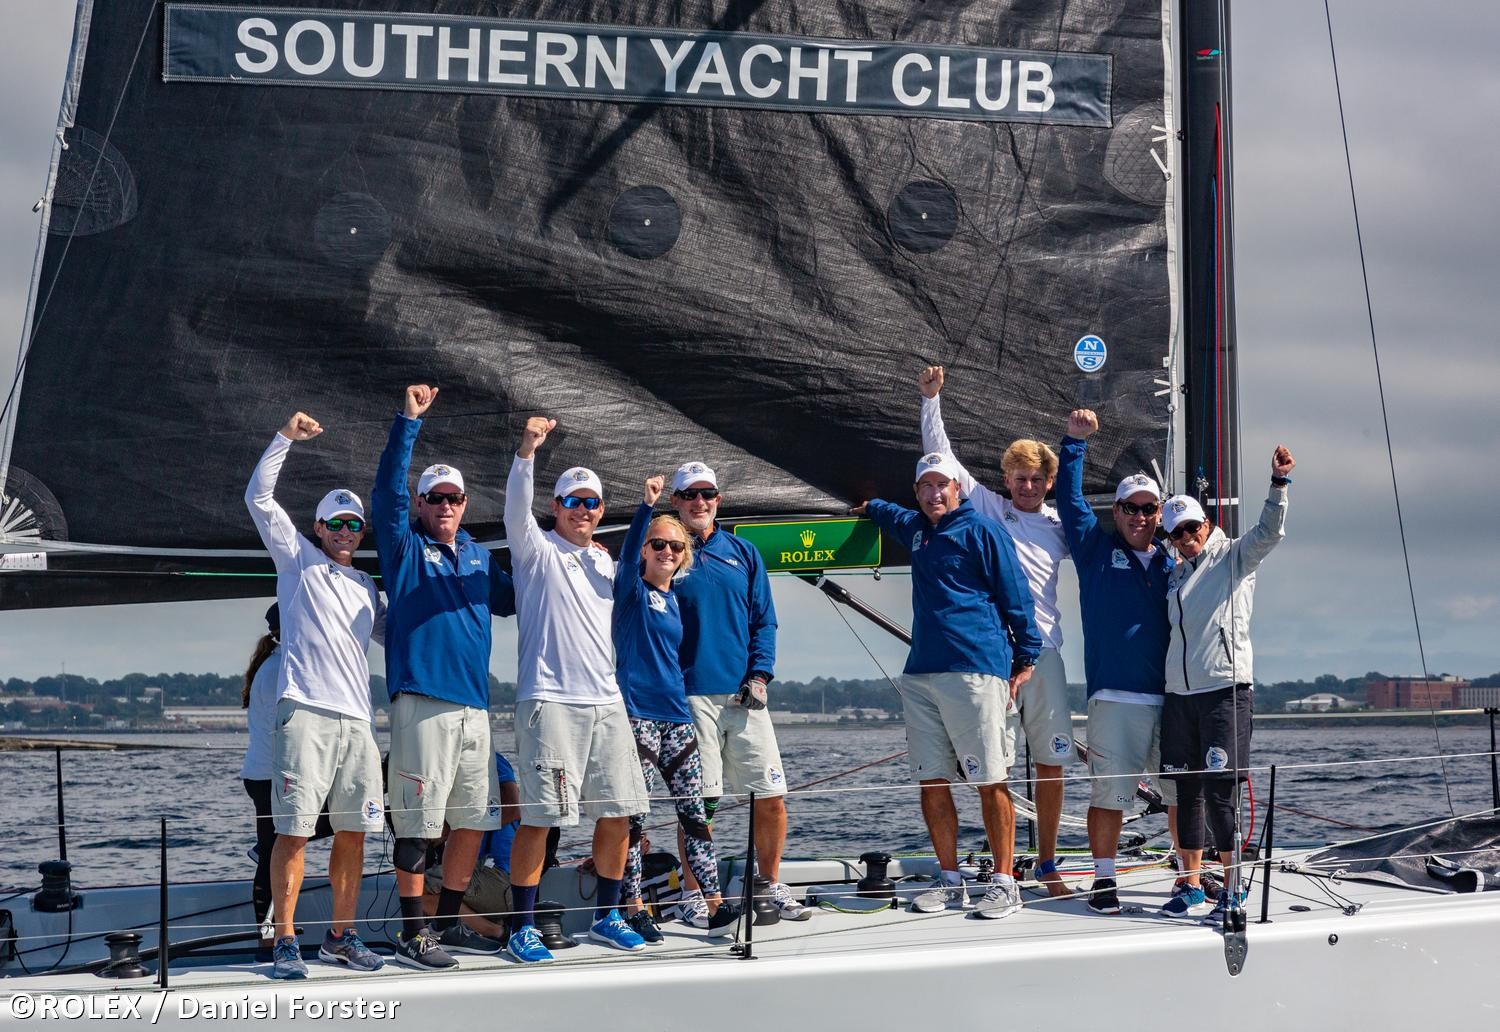 Southern Yacht Club Wins Rolex NYYC Invitational Cup for Second Time